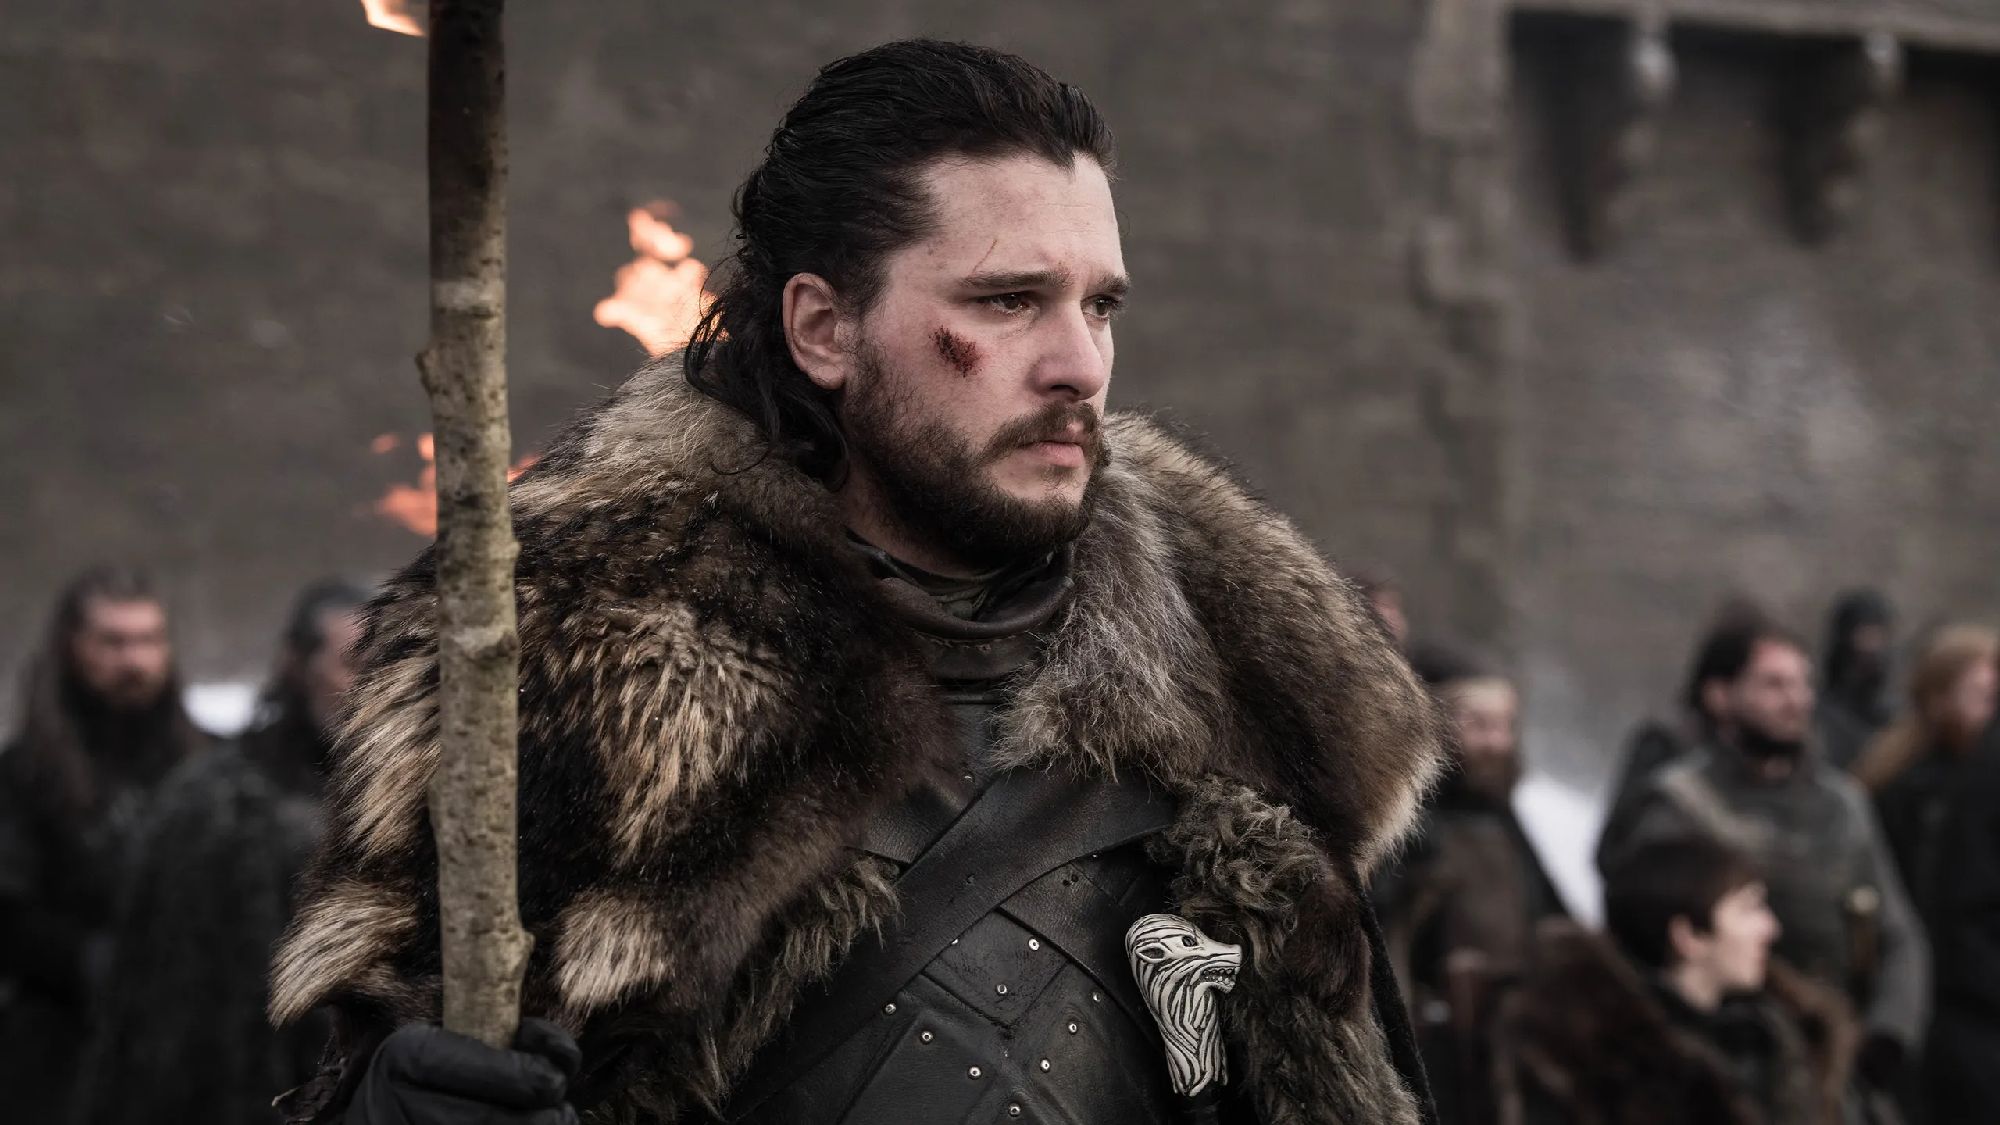 Every season comes "game of Thrones" in 4k.(HBO)